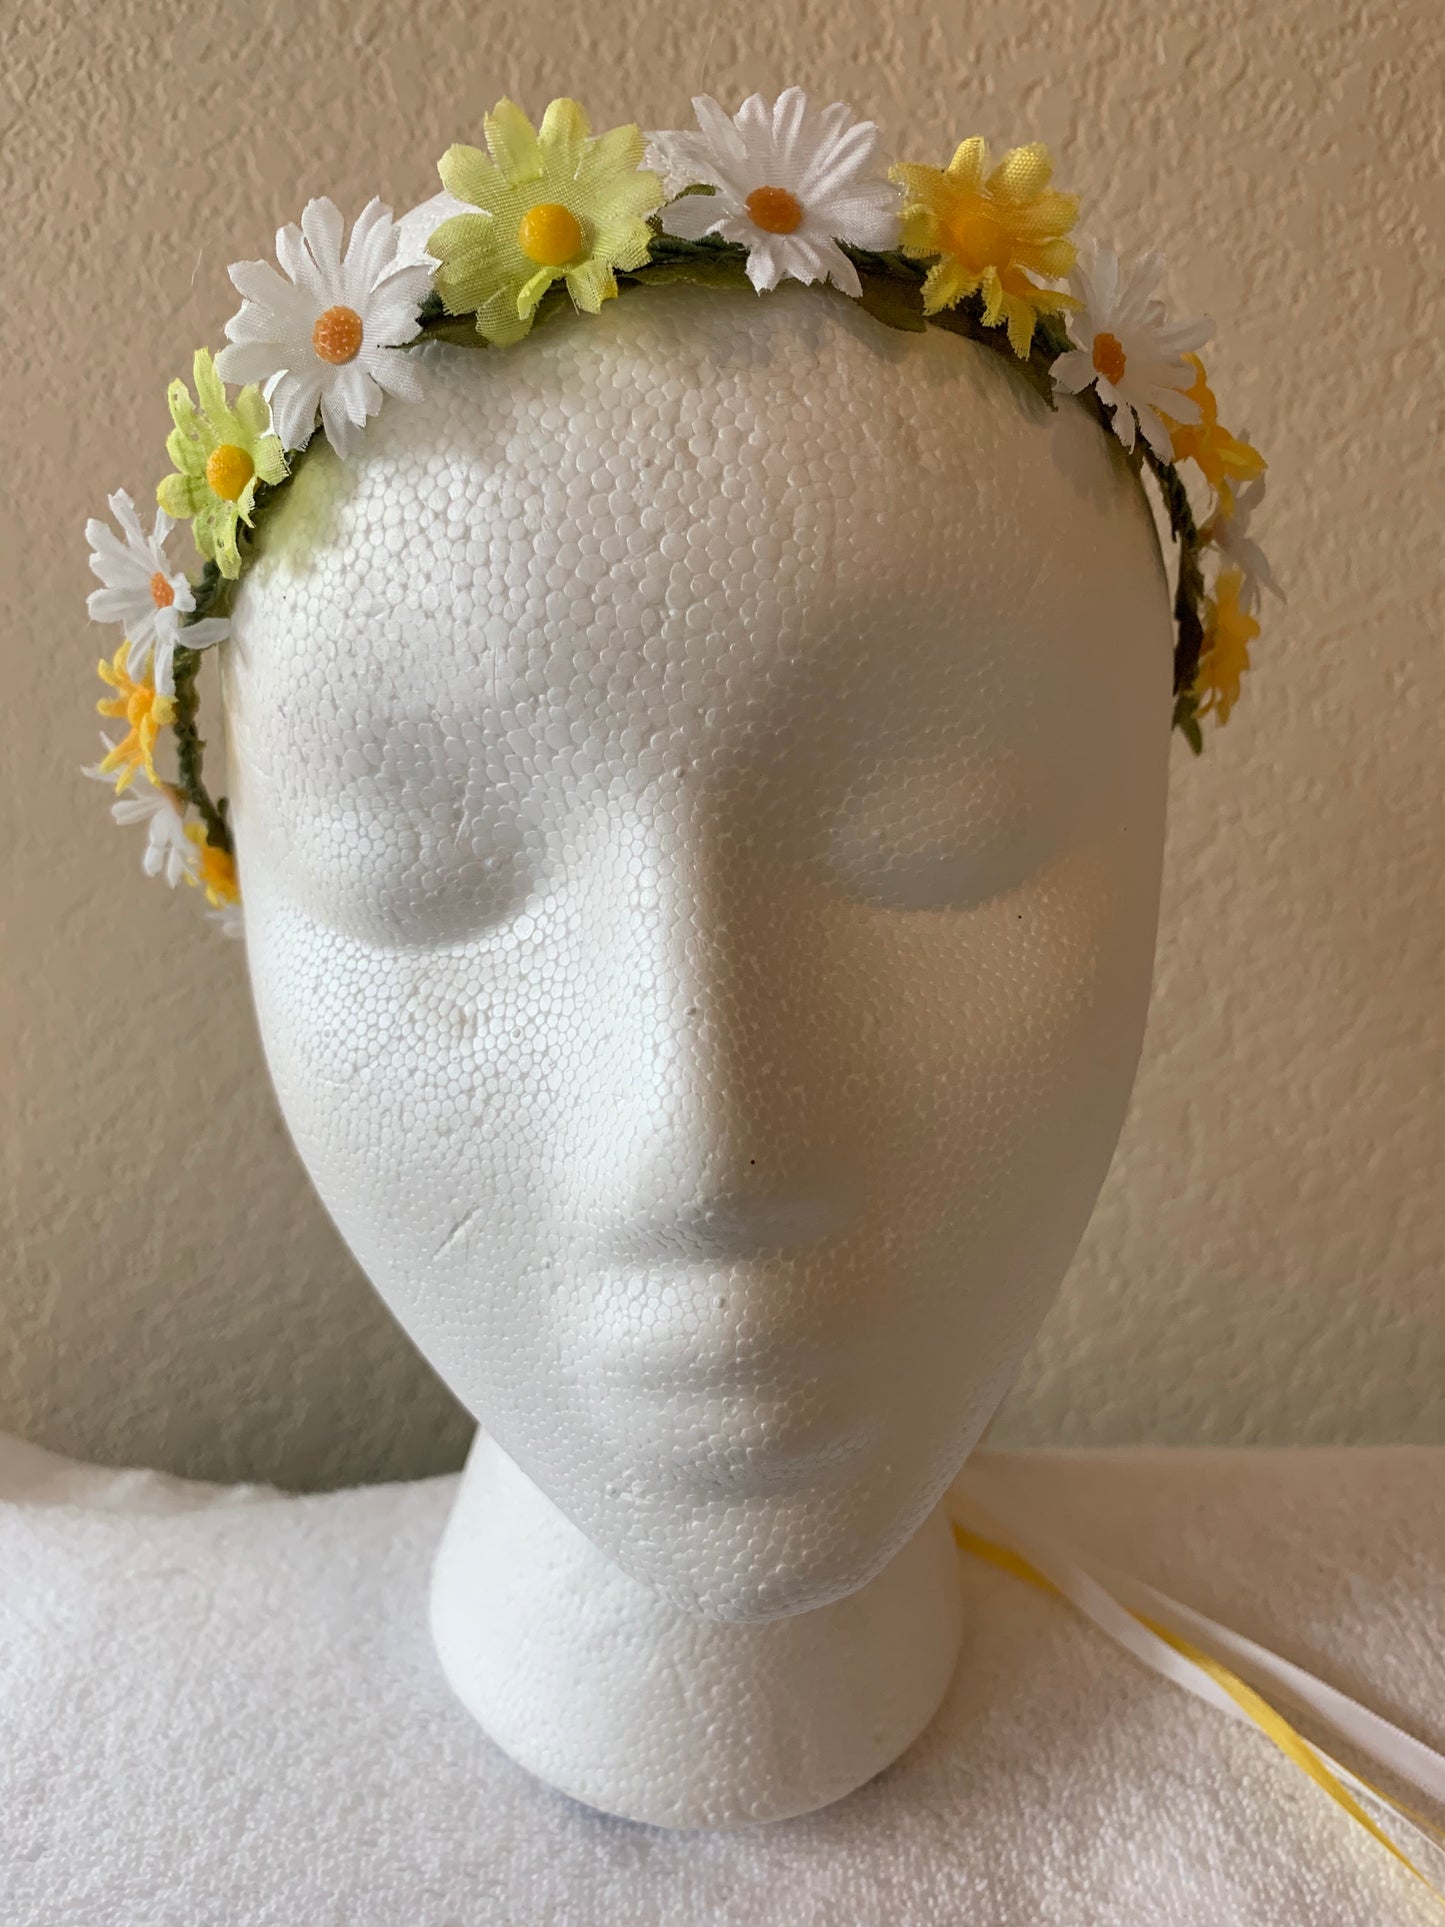 Extra Small Wreath - White and Yellow Daisies